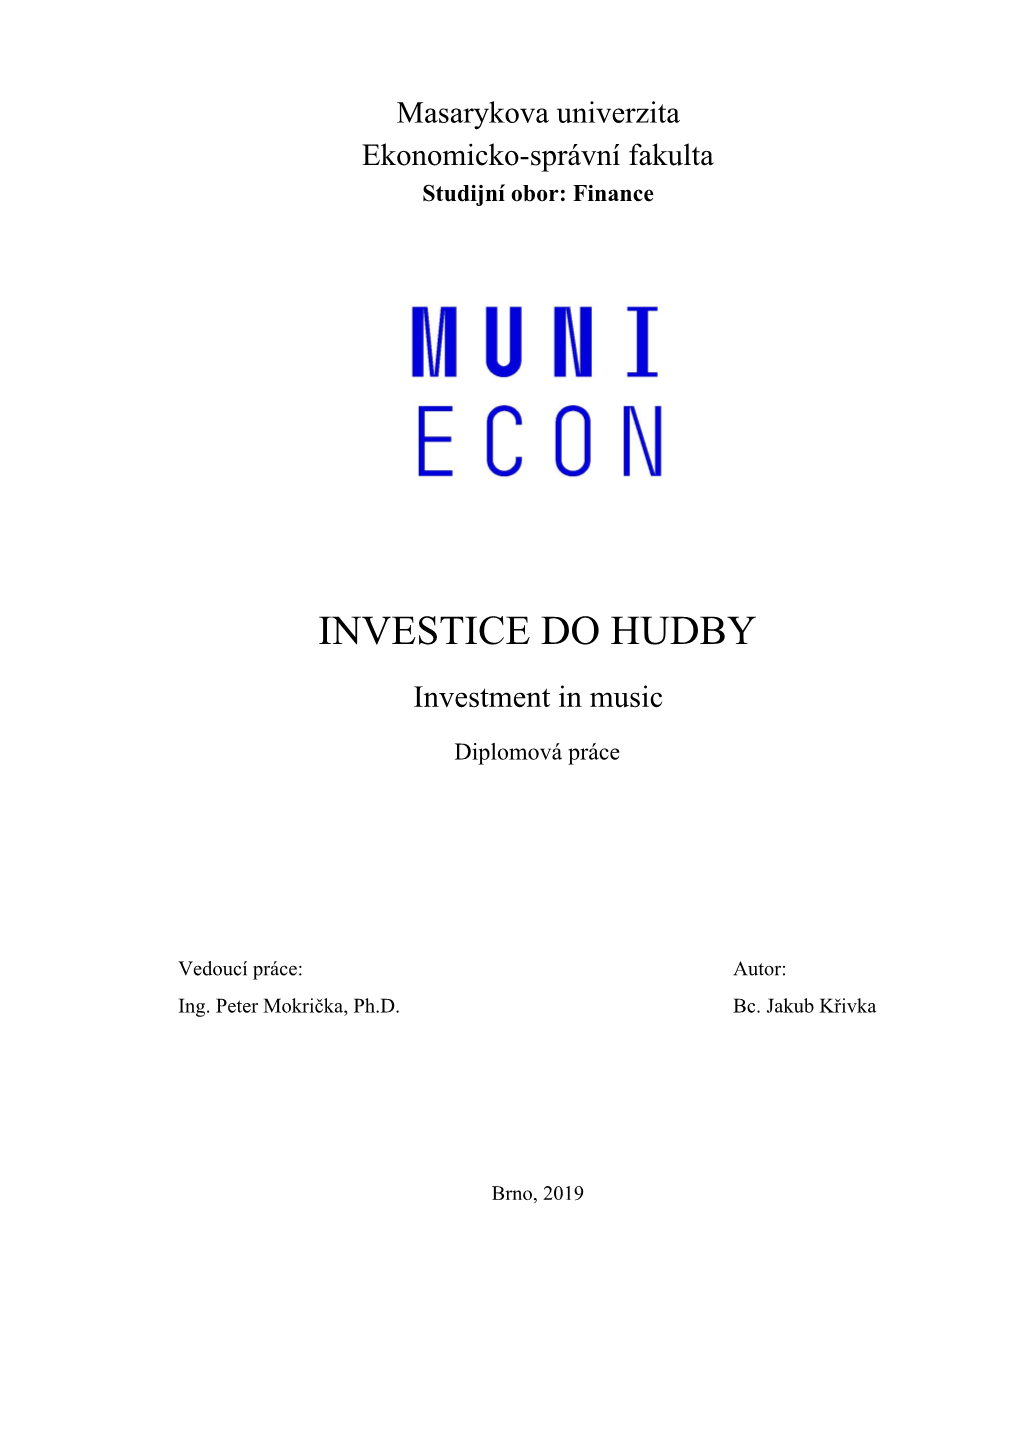 INVESTICE DO HUDBY Investment in Music